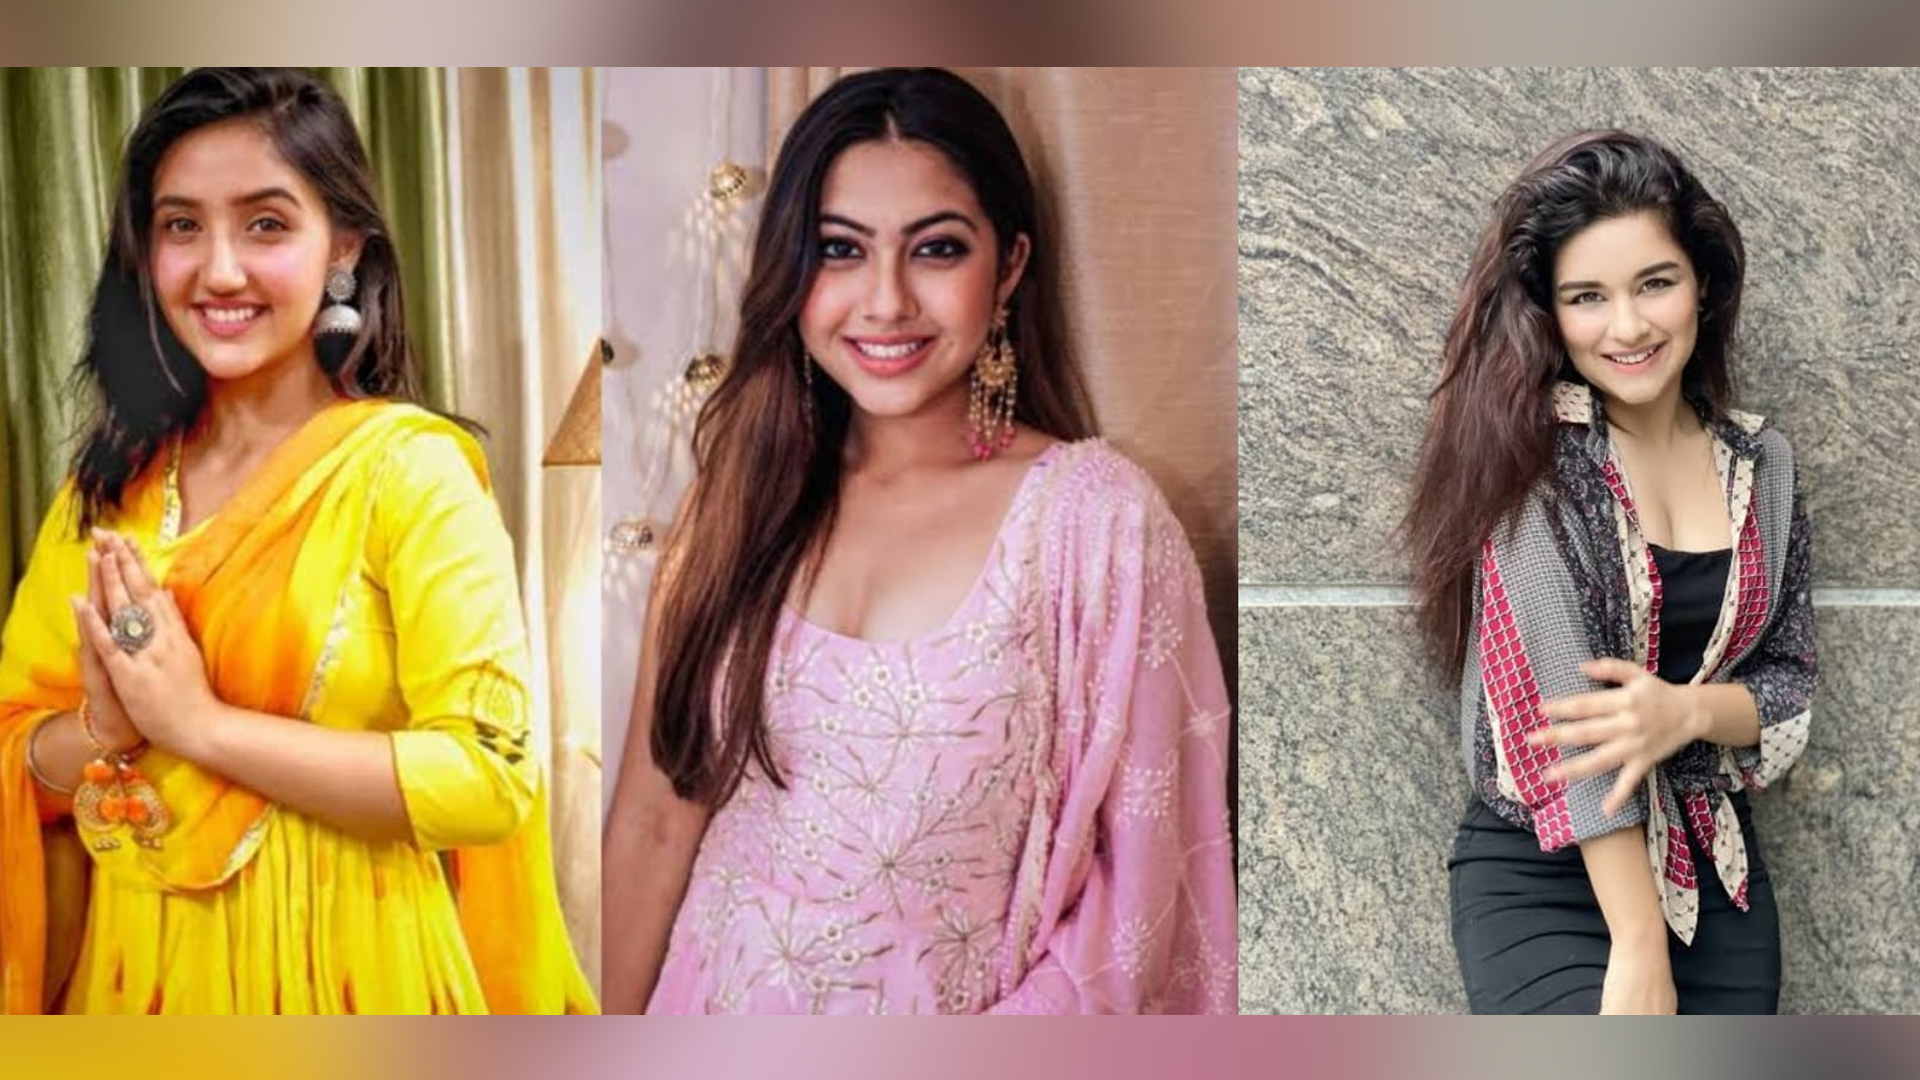 Are Reem Shaikh, Ashnoor Kaur, and Avneet Kaur Being Approached To Play The Lead Role In the Show Imlie?